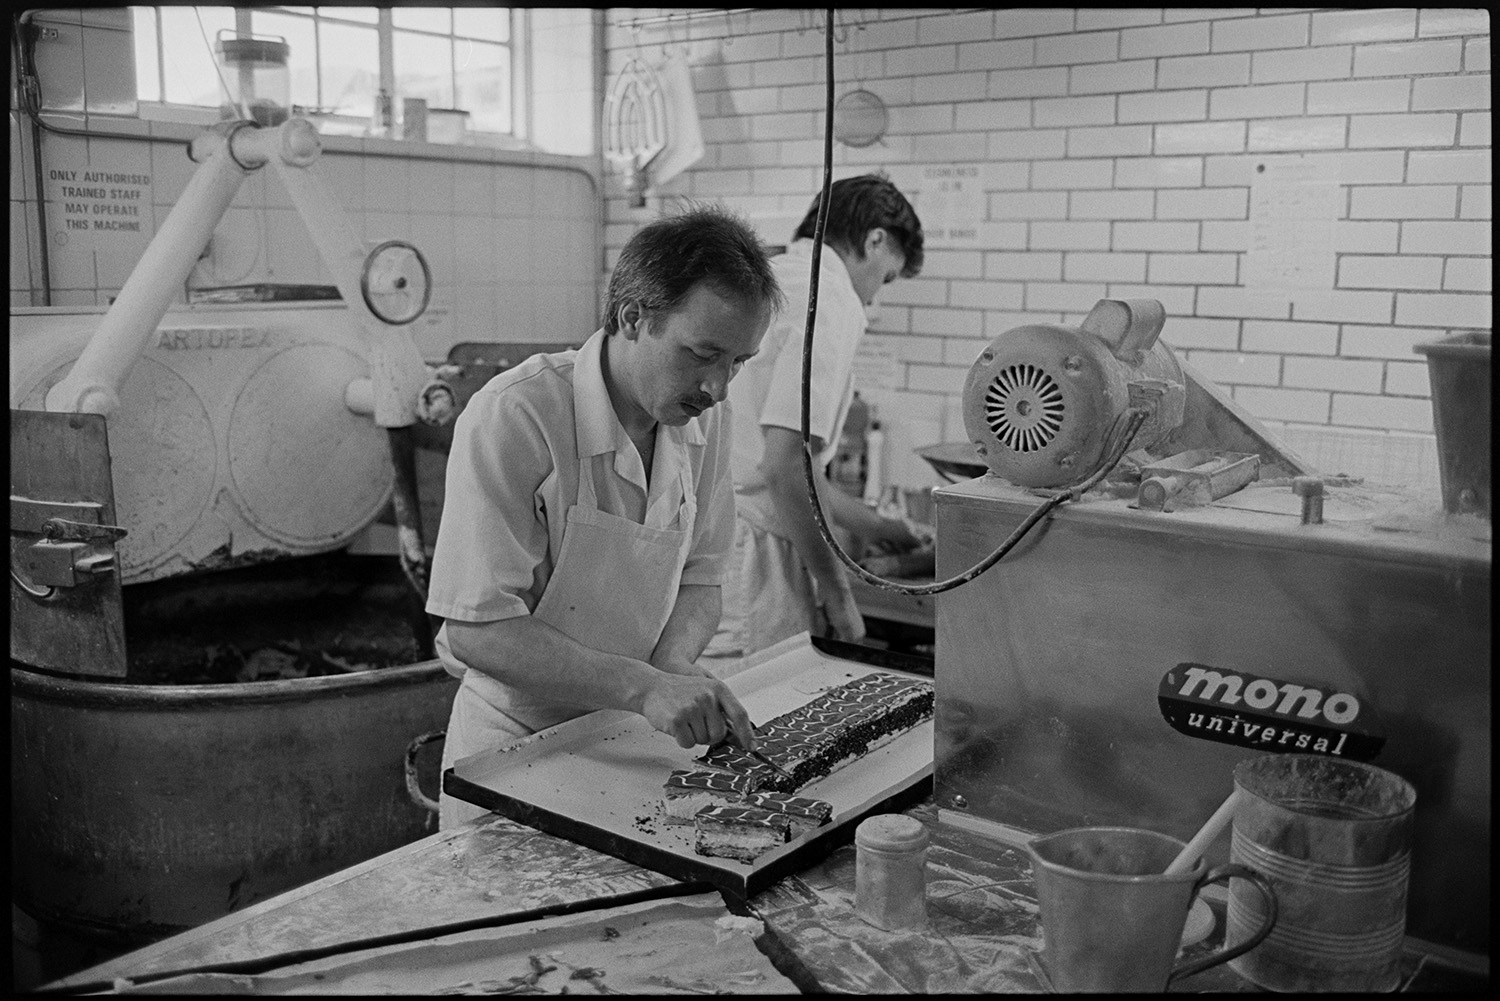 Bakery interior, making bread and serving customers in shop.
[Two men working in the white tiled kitchen at The Bakery in East Street, Chulmleigh. One man is cutting cake slices in a tray on a bench. There is a dough mixing machine along with other bakery equipment in the background.]